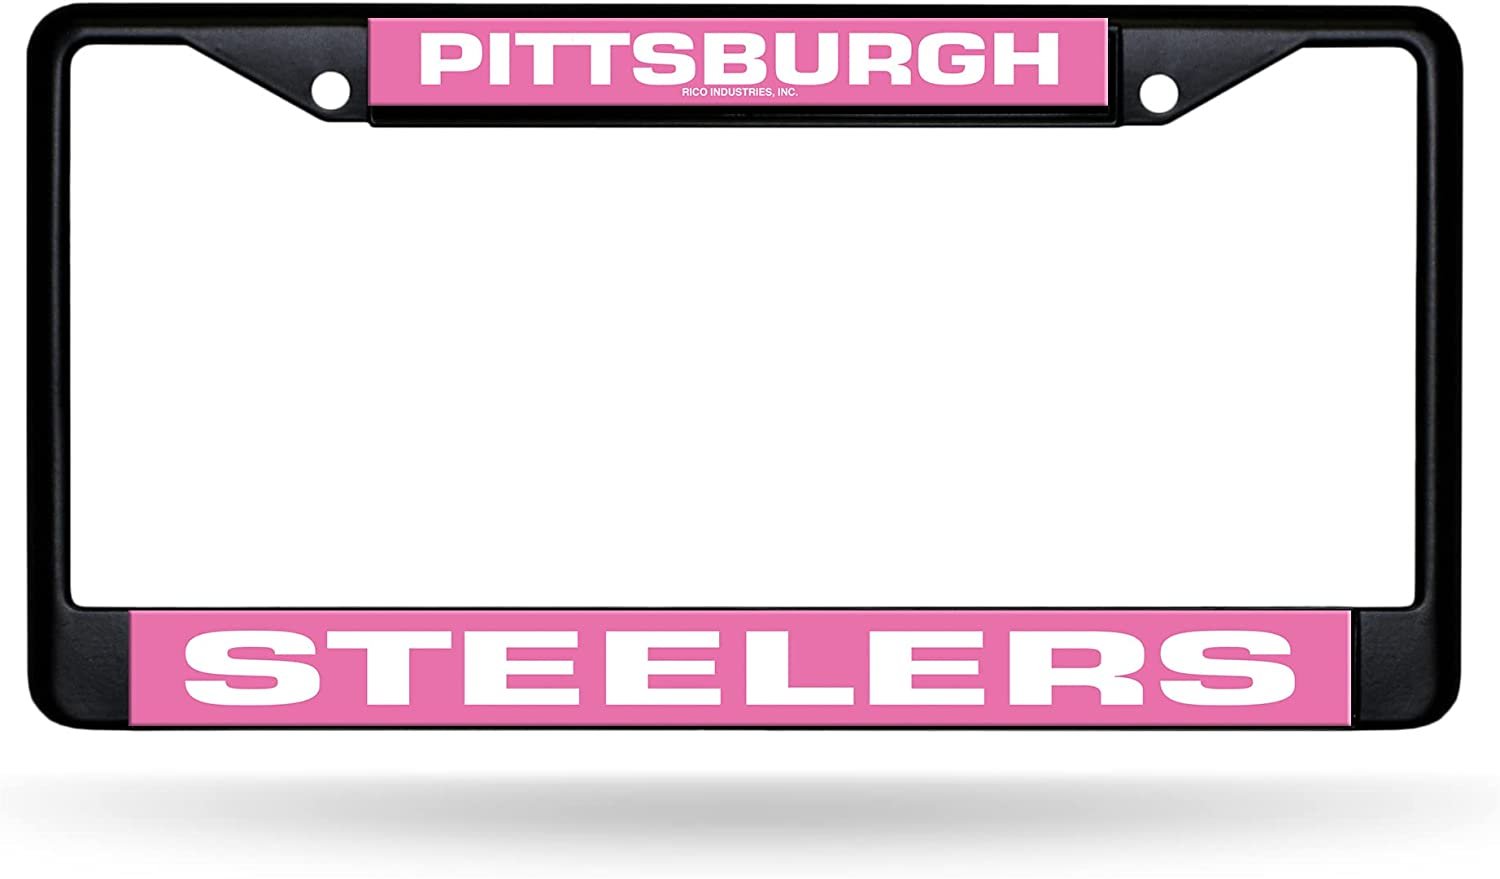 Pittsburgh Steelers Black Metal License Plate Frame Chrome Tag Cover Pink Inserts 6x12 Inch